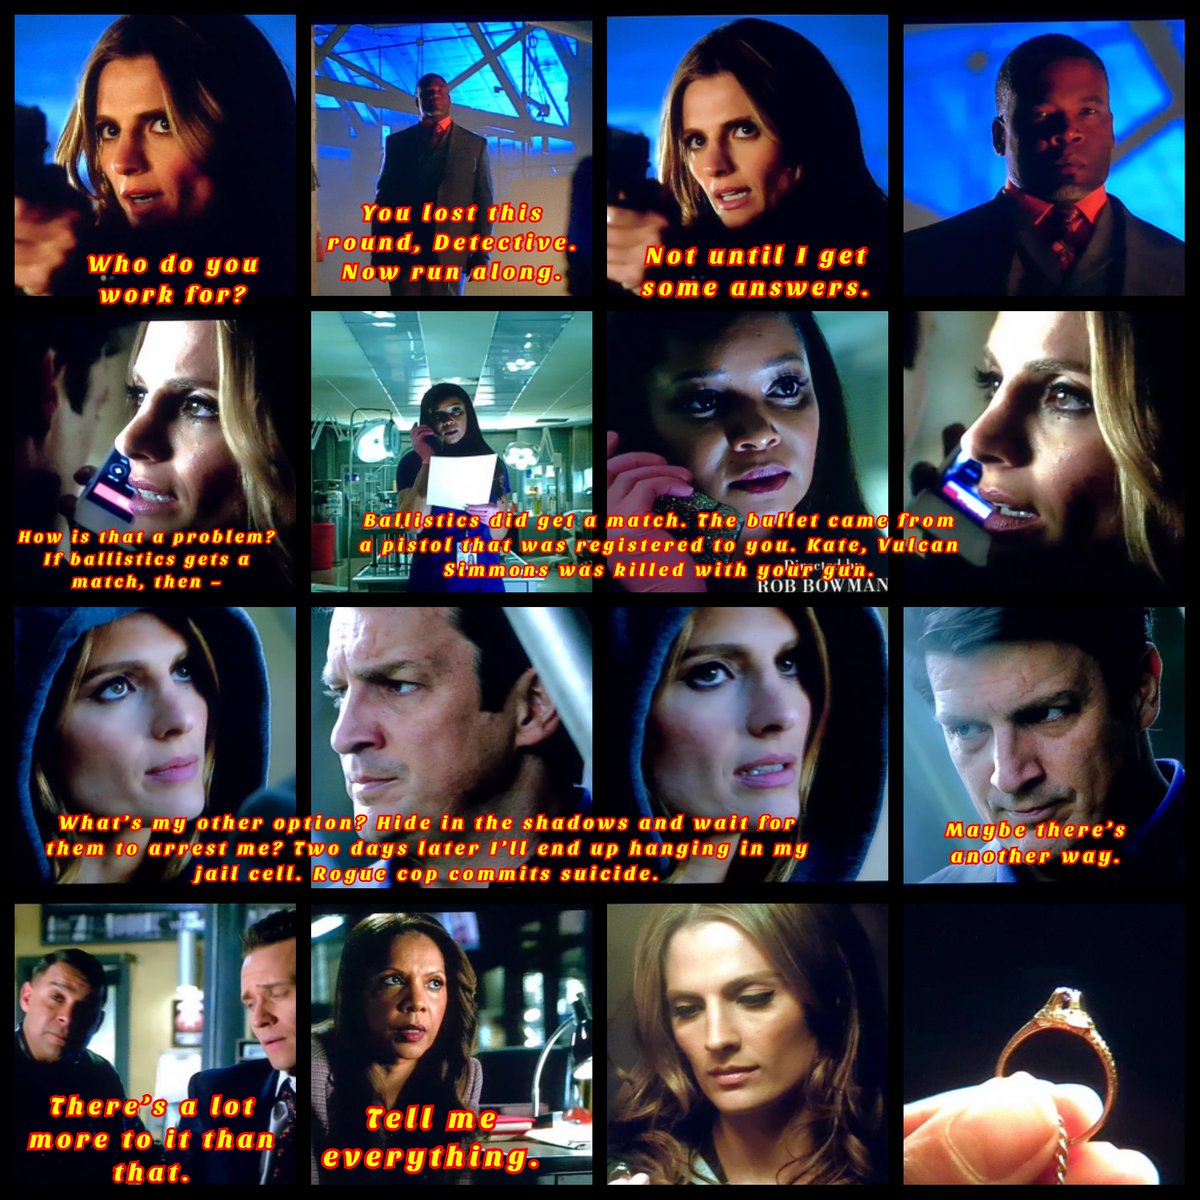 No #Castle aired on 12/22/xx -but a memory for u 6x22 - VERITAS (I/II)

KB: Wait, how is that a problem? If Ballistics gets a match, then..

LP: Ballistics did get a match. The bullet came from a pistol that was registered to you. Kate, Vulcan Simmons was killed with your gun. https://t.co/nPvBGoehz2